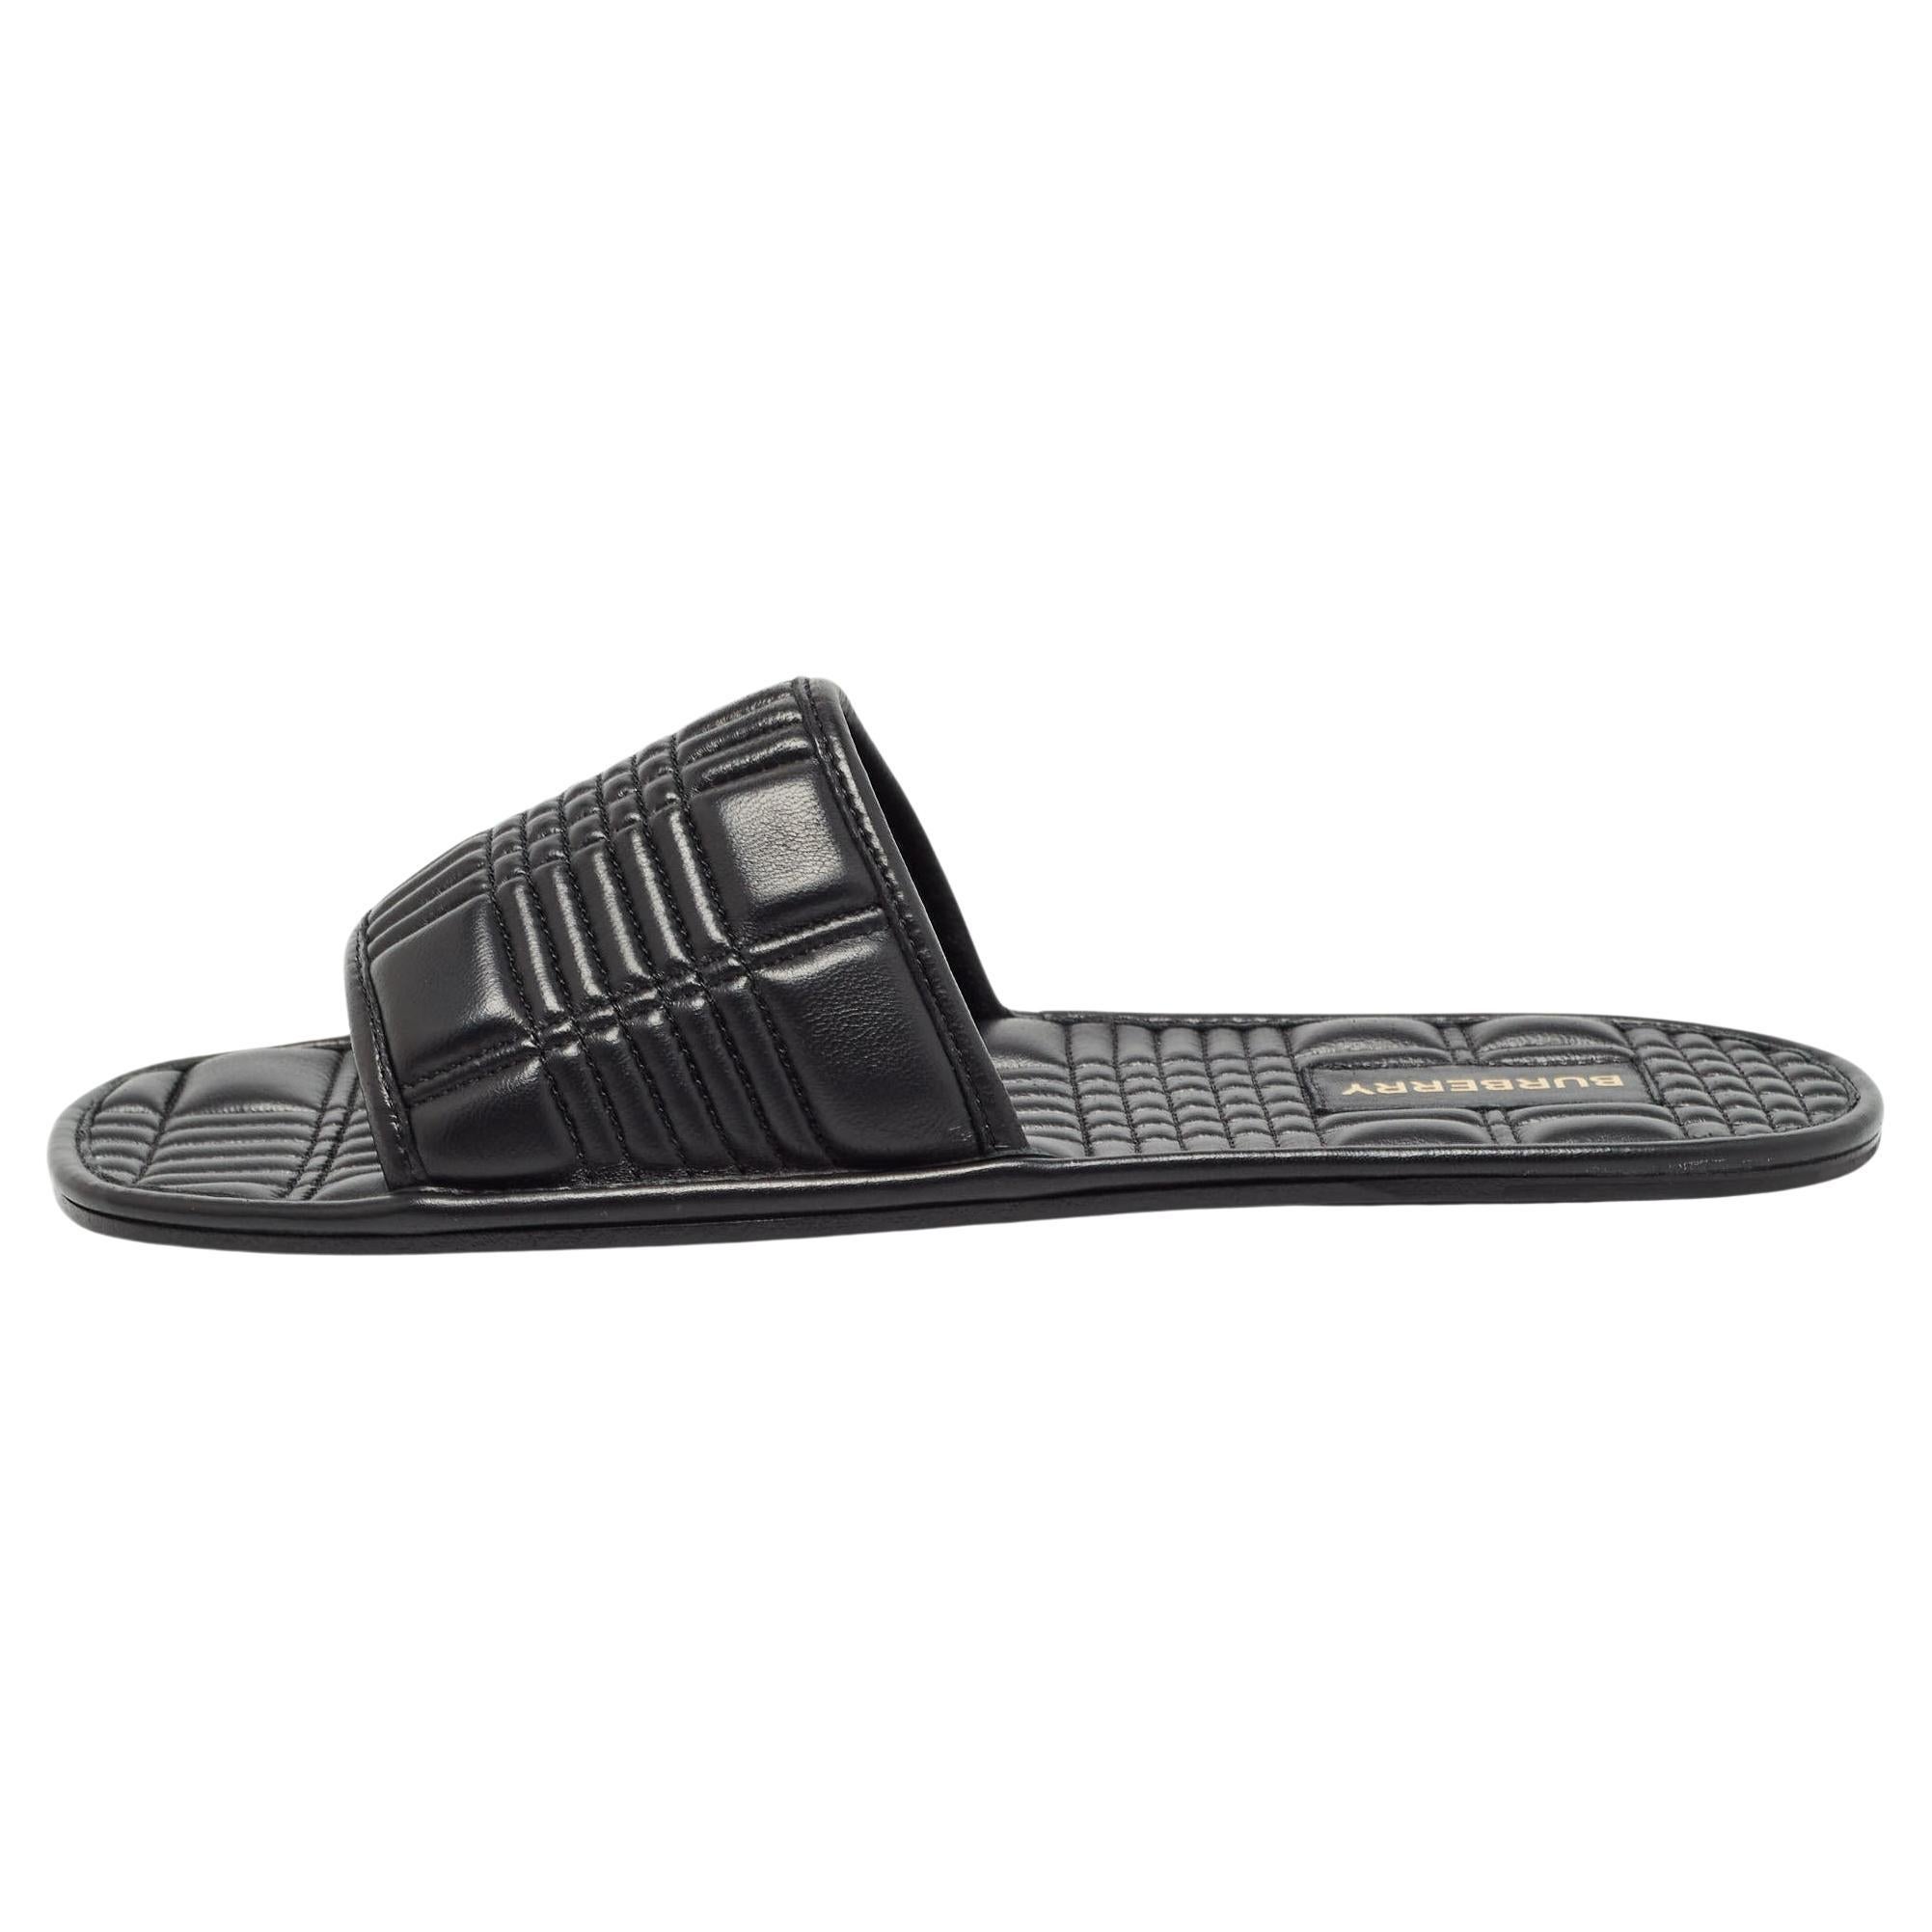 Burberry Black Quilted Leather Alixa Flat Slides Size 38